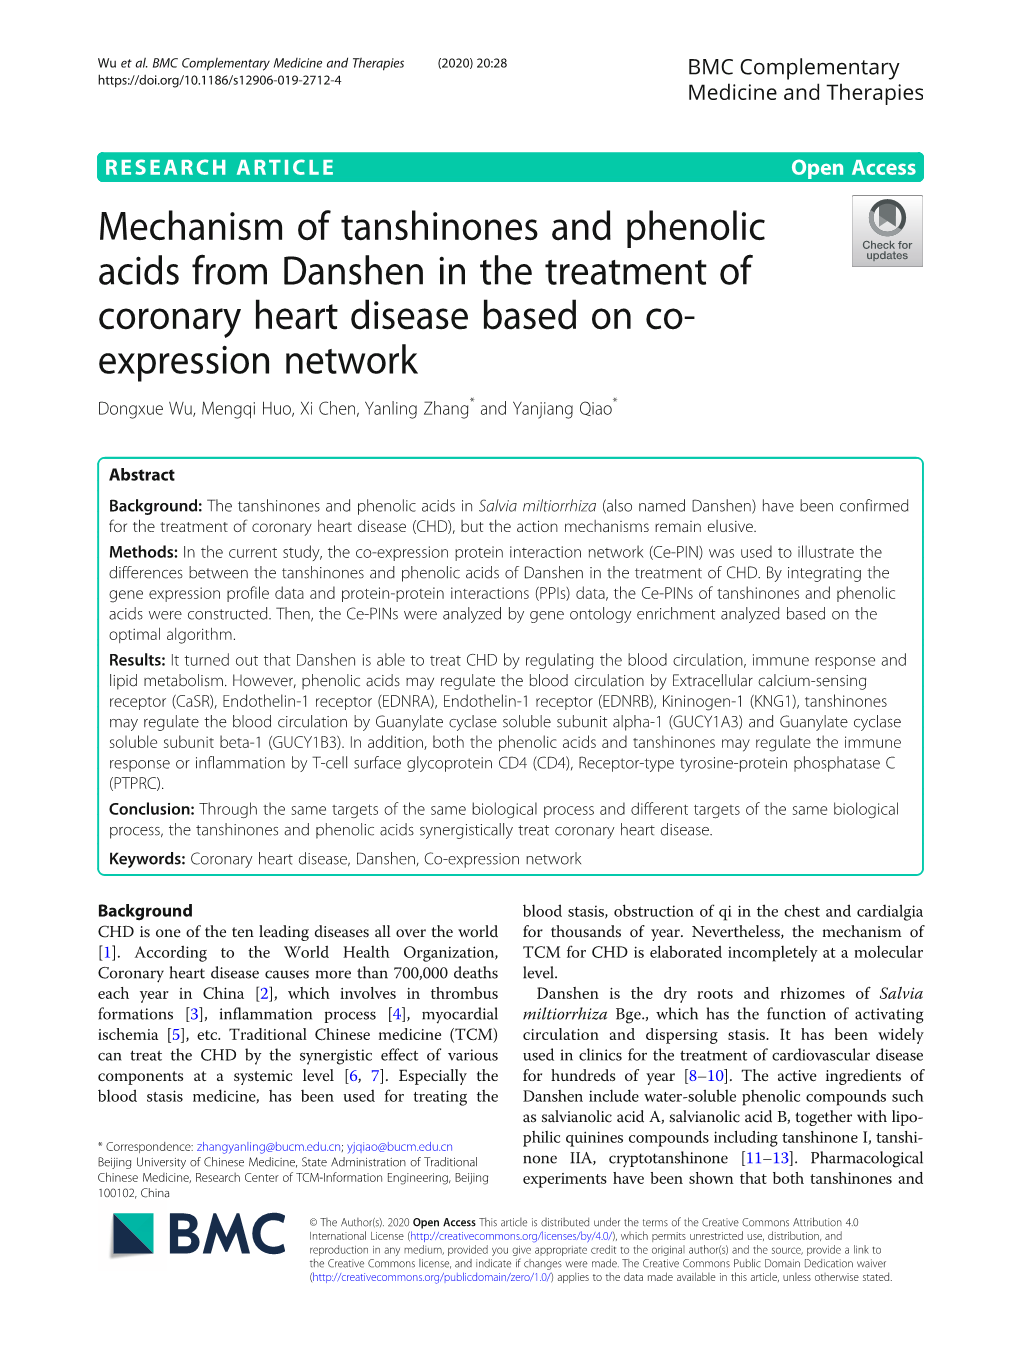 Mechanism of Tanshinones and Phenolic Acids from Danshen in The